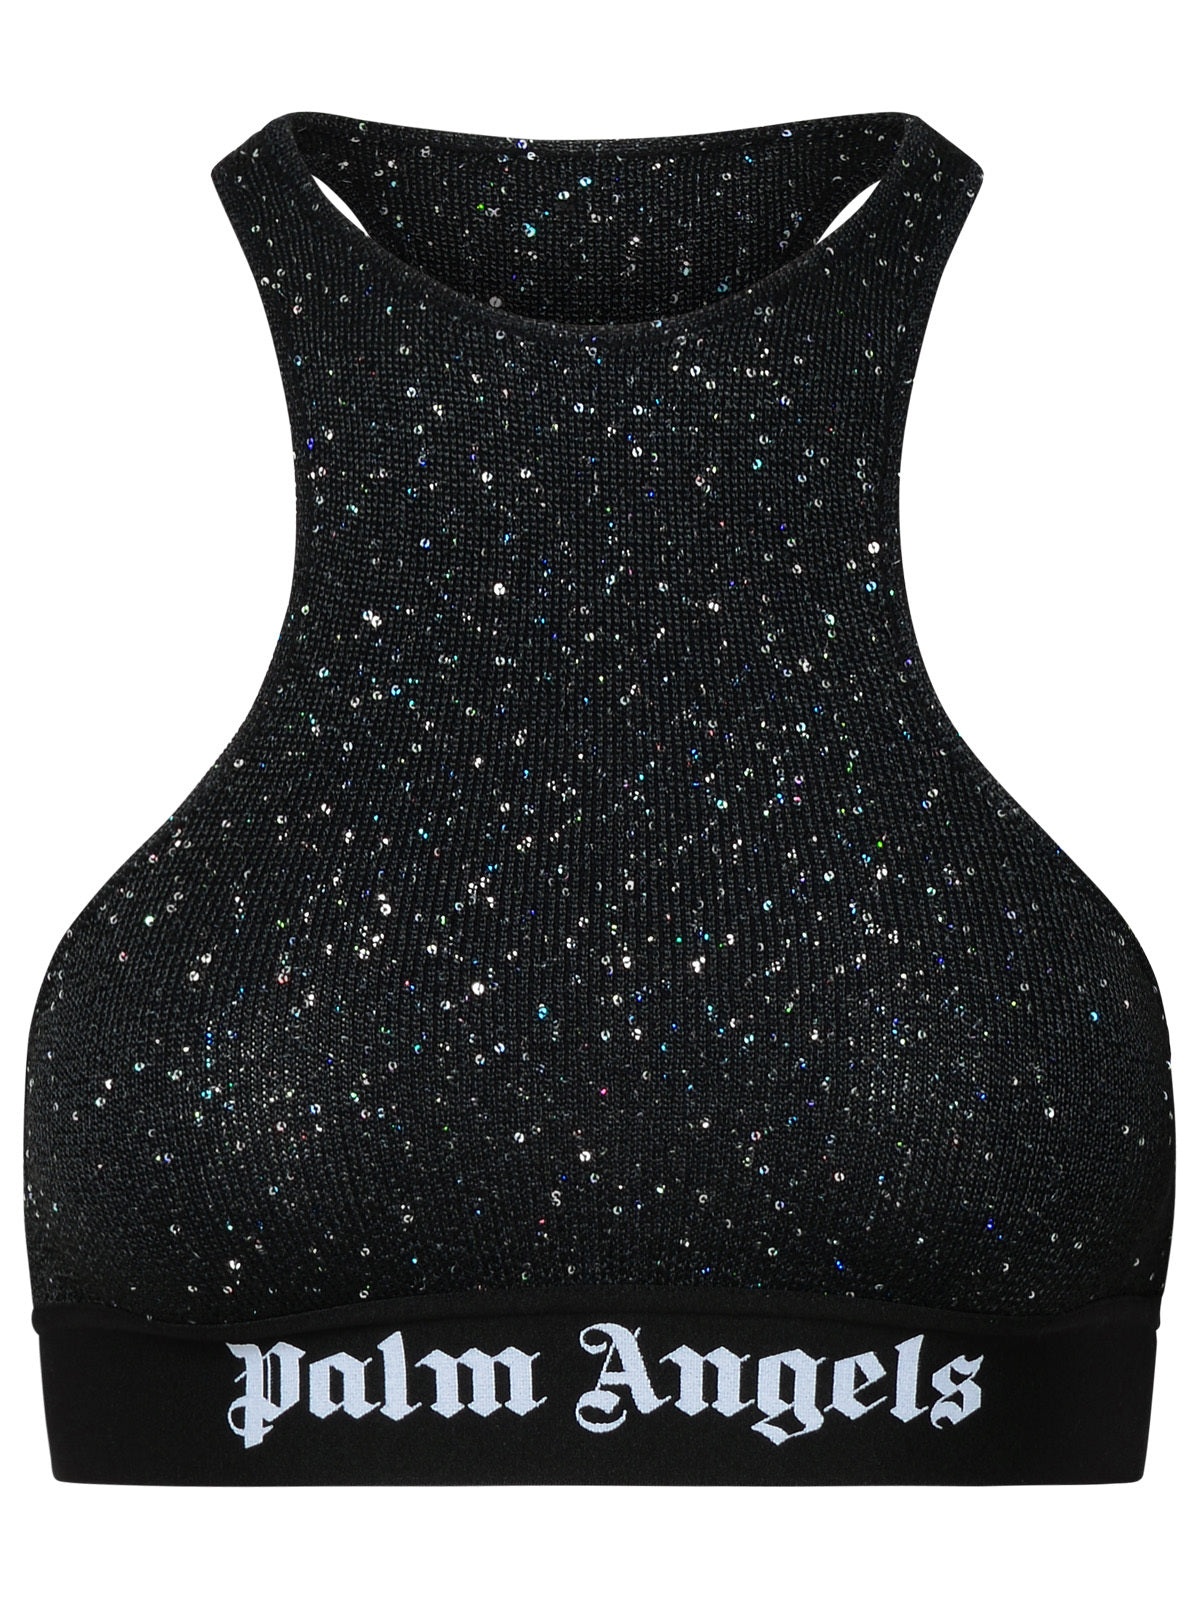 PALM ANGELS Woman Soire Top In Black Viscose Blend - 1